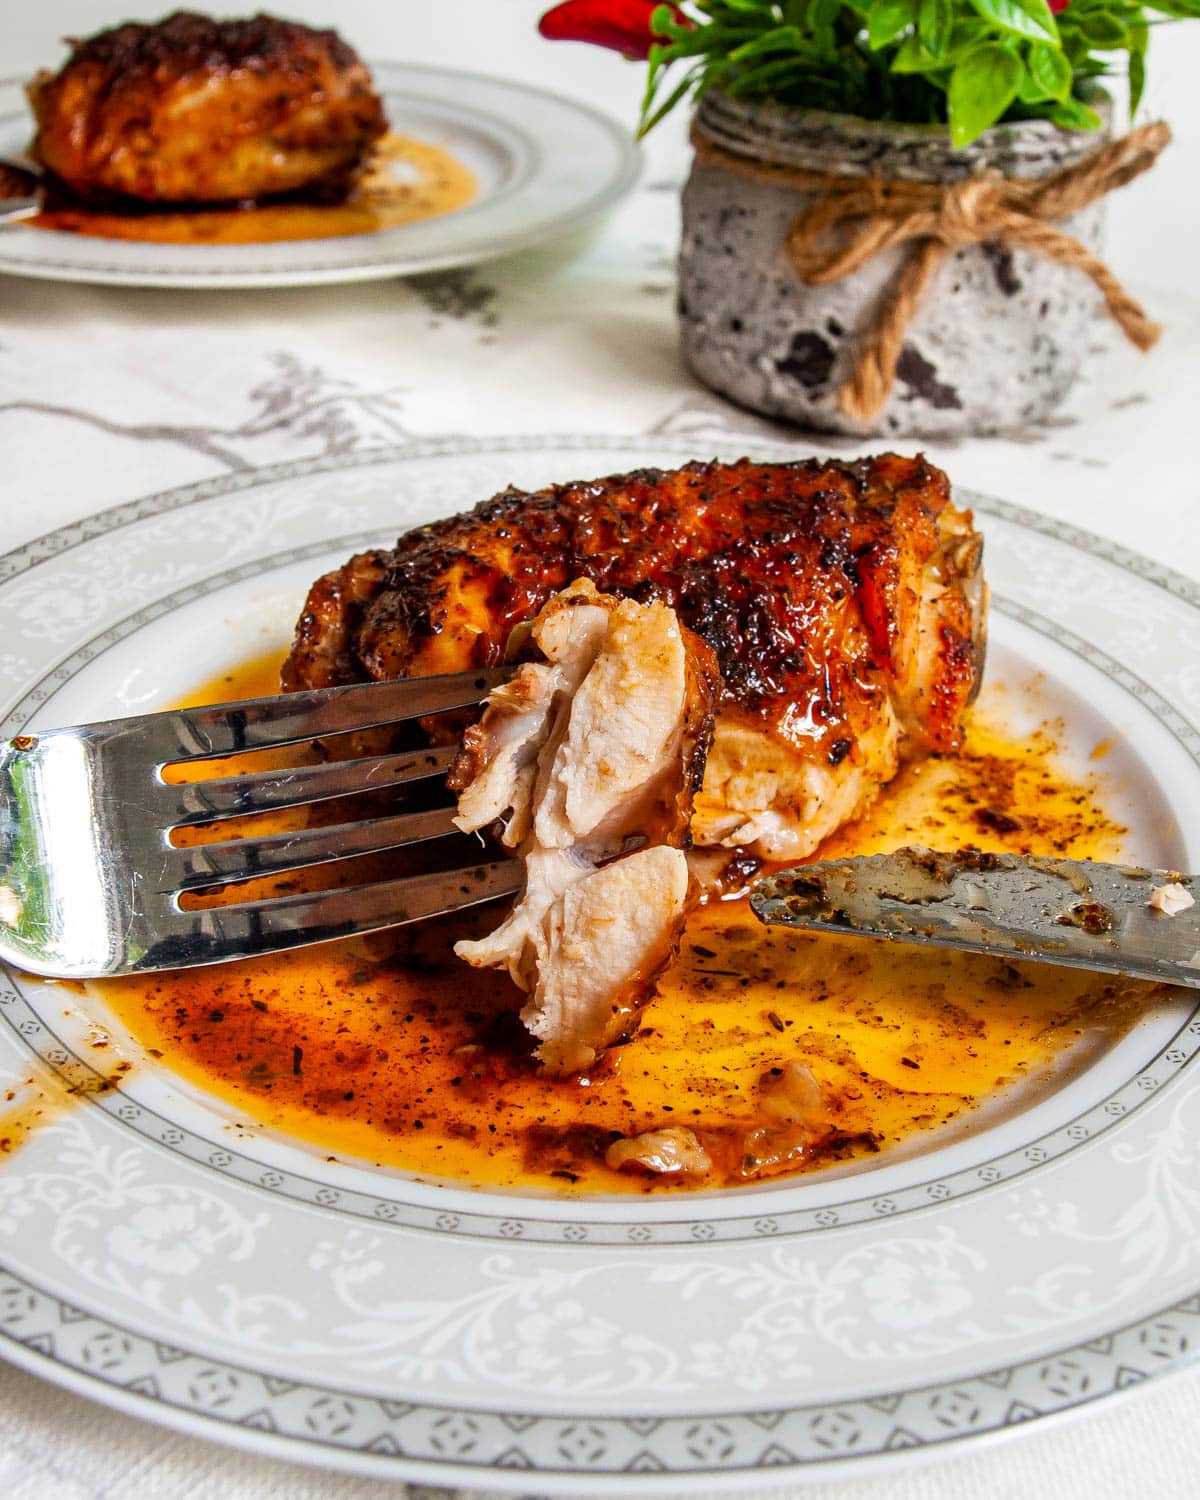 baked chicken thigh on a plate with a piece cut out of it